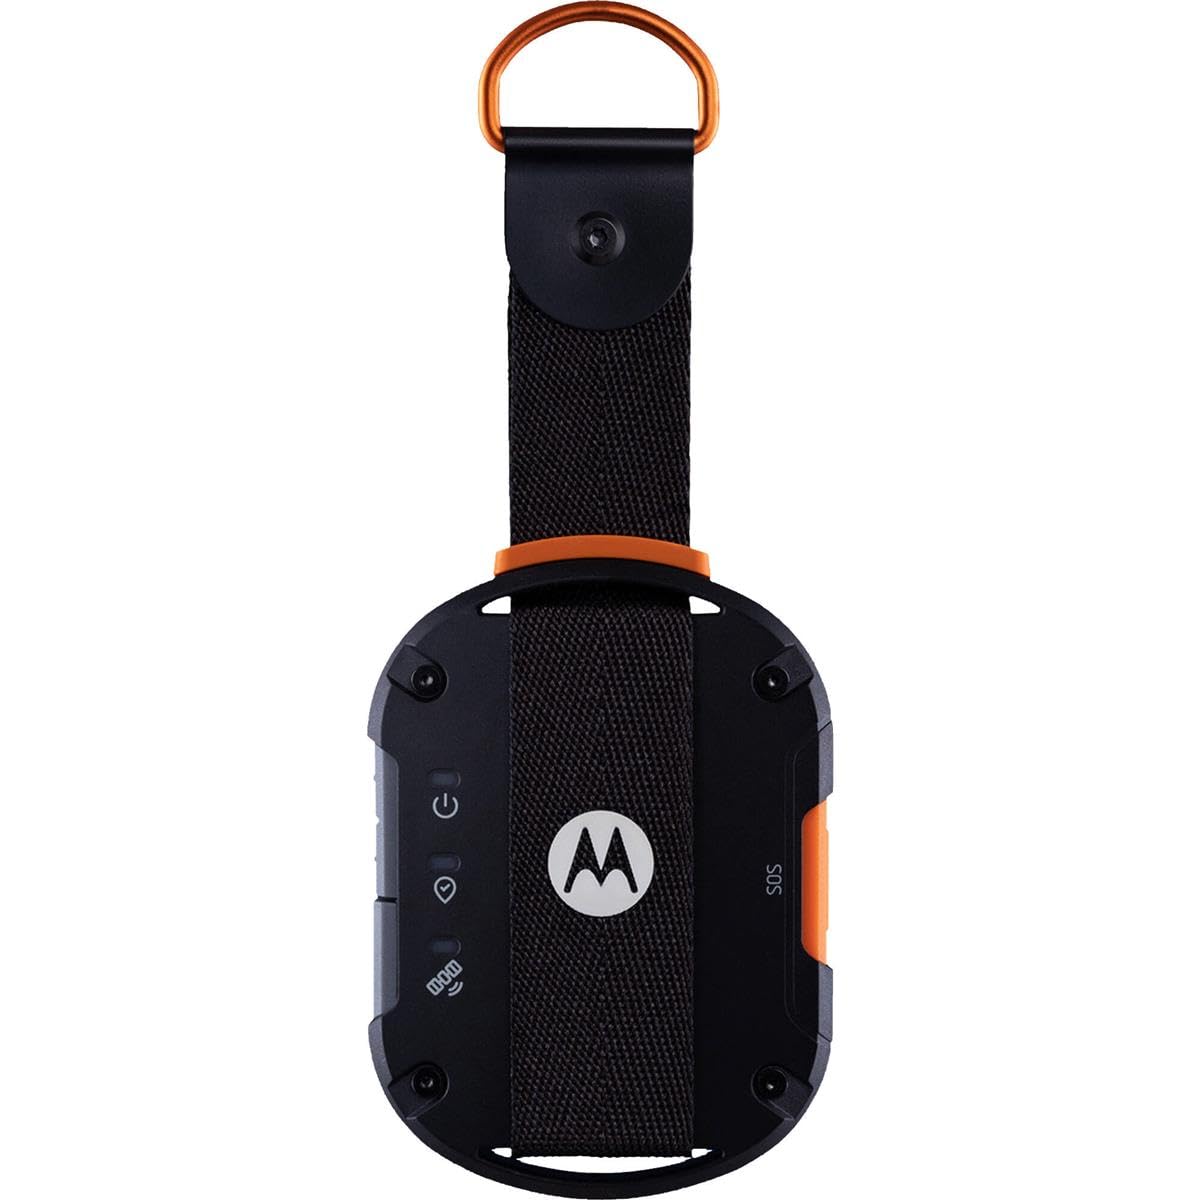 Motorola Defy Satellite Link - Rugged Handheld GPS Communicator, Two-Way Global SMS Text Messenger, Emergency SOS Alerting - Android iOS Compatible